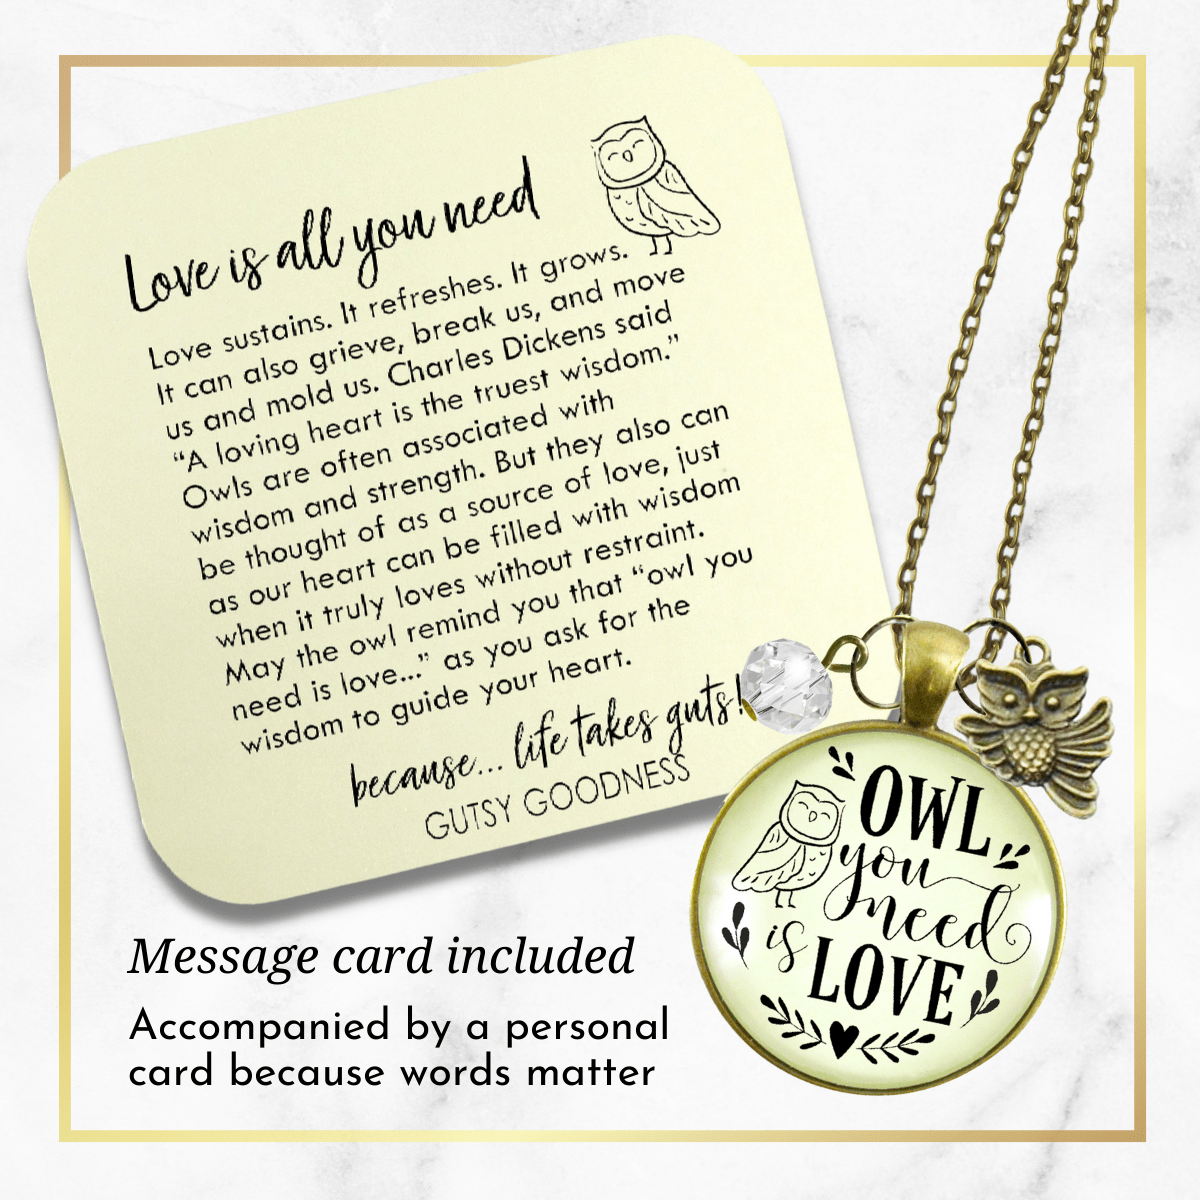 Gutsy Goodness Owl Necklace You Need Love Vintage Friendship Quote Pendant Jewelry - Gutsy Goodness Handmade Jewelry;Owl Necklace You Need Love Vintage Friendship Quote Pendant Jewelry - Gutsy Goodness Handmade Jewelry Gifts